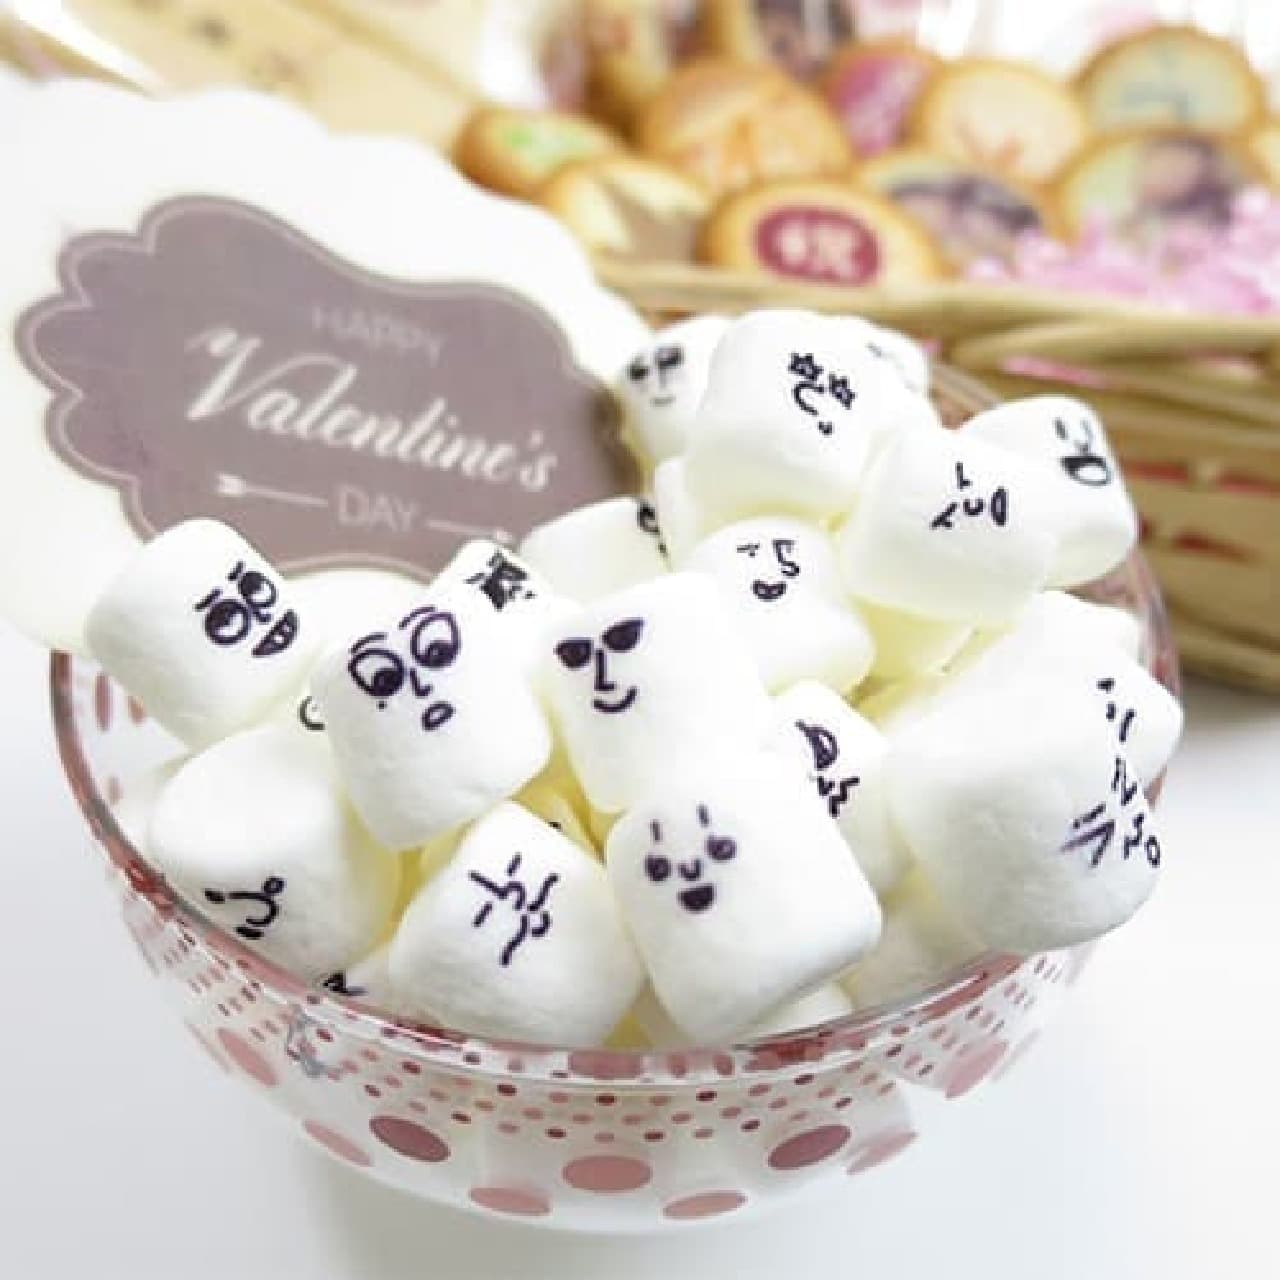 Can be printed on soft foods such as marshmallows